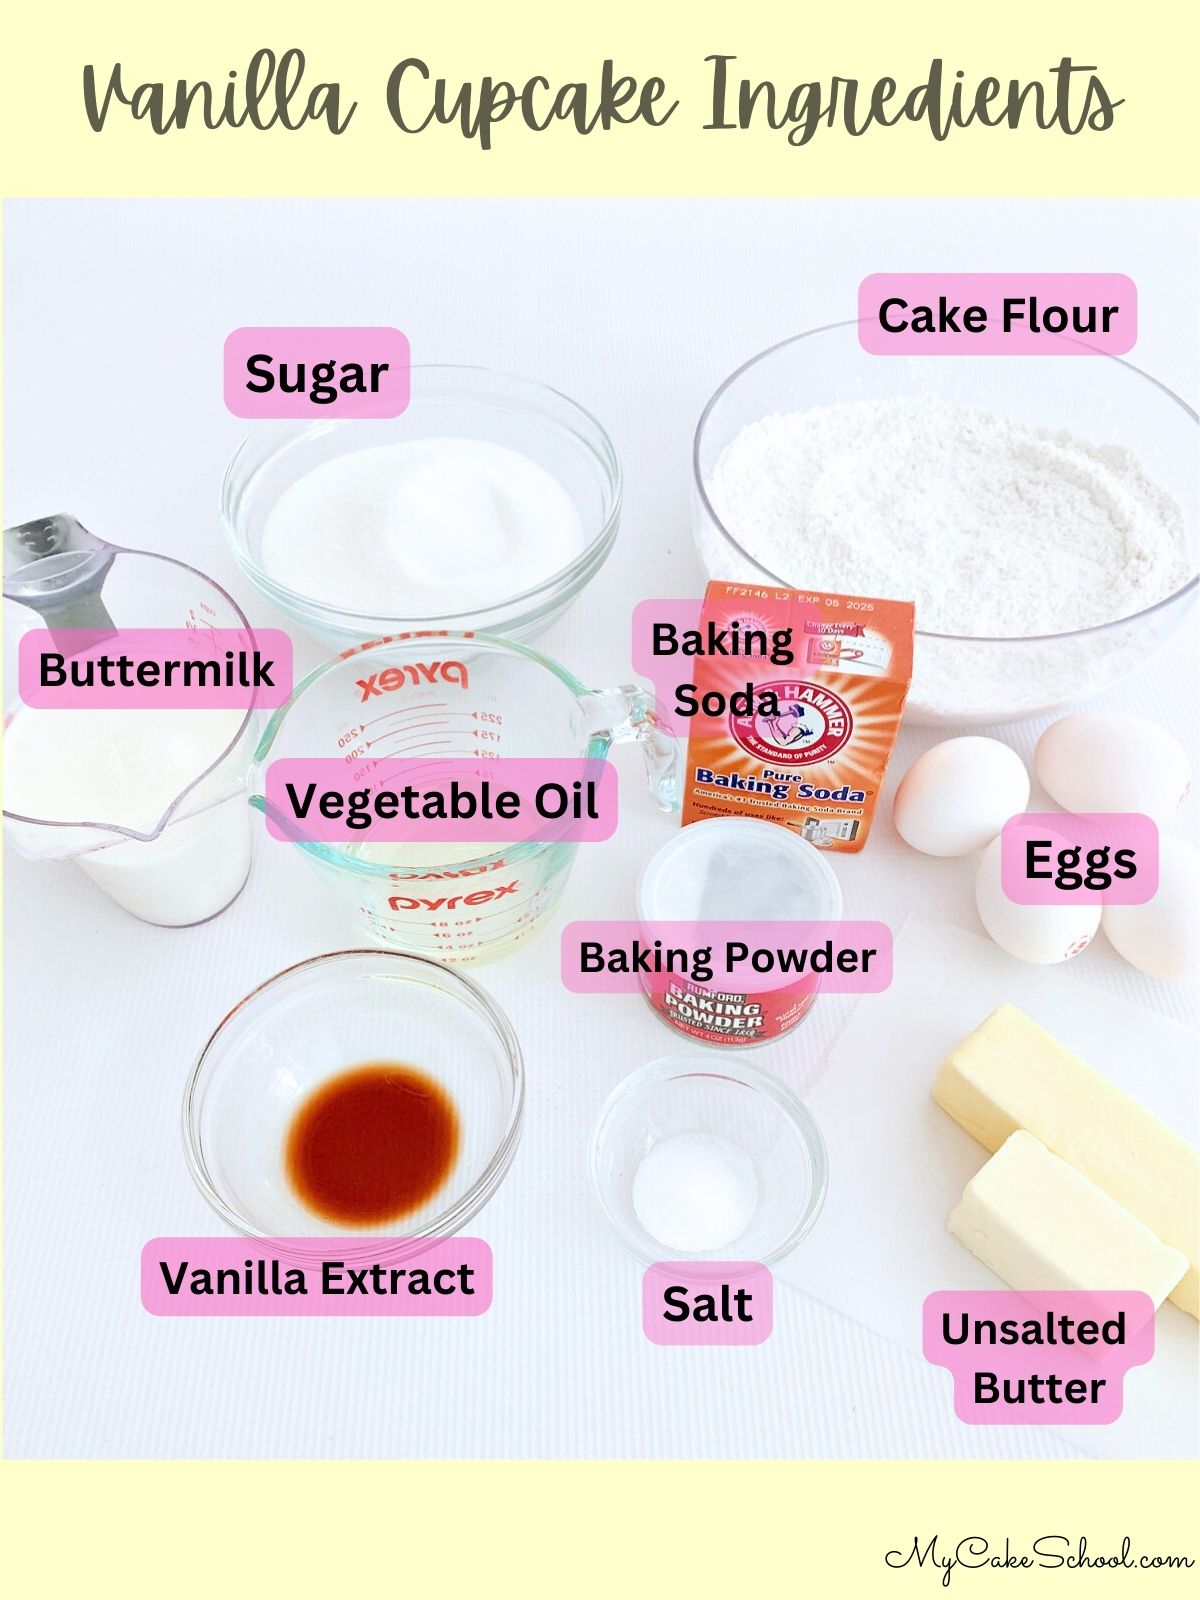 The ingredients needed for the Vanilla Cupcakes